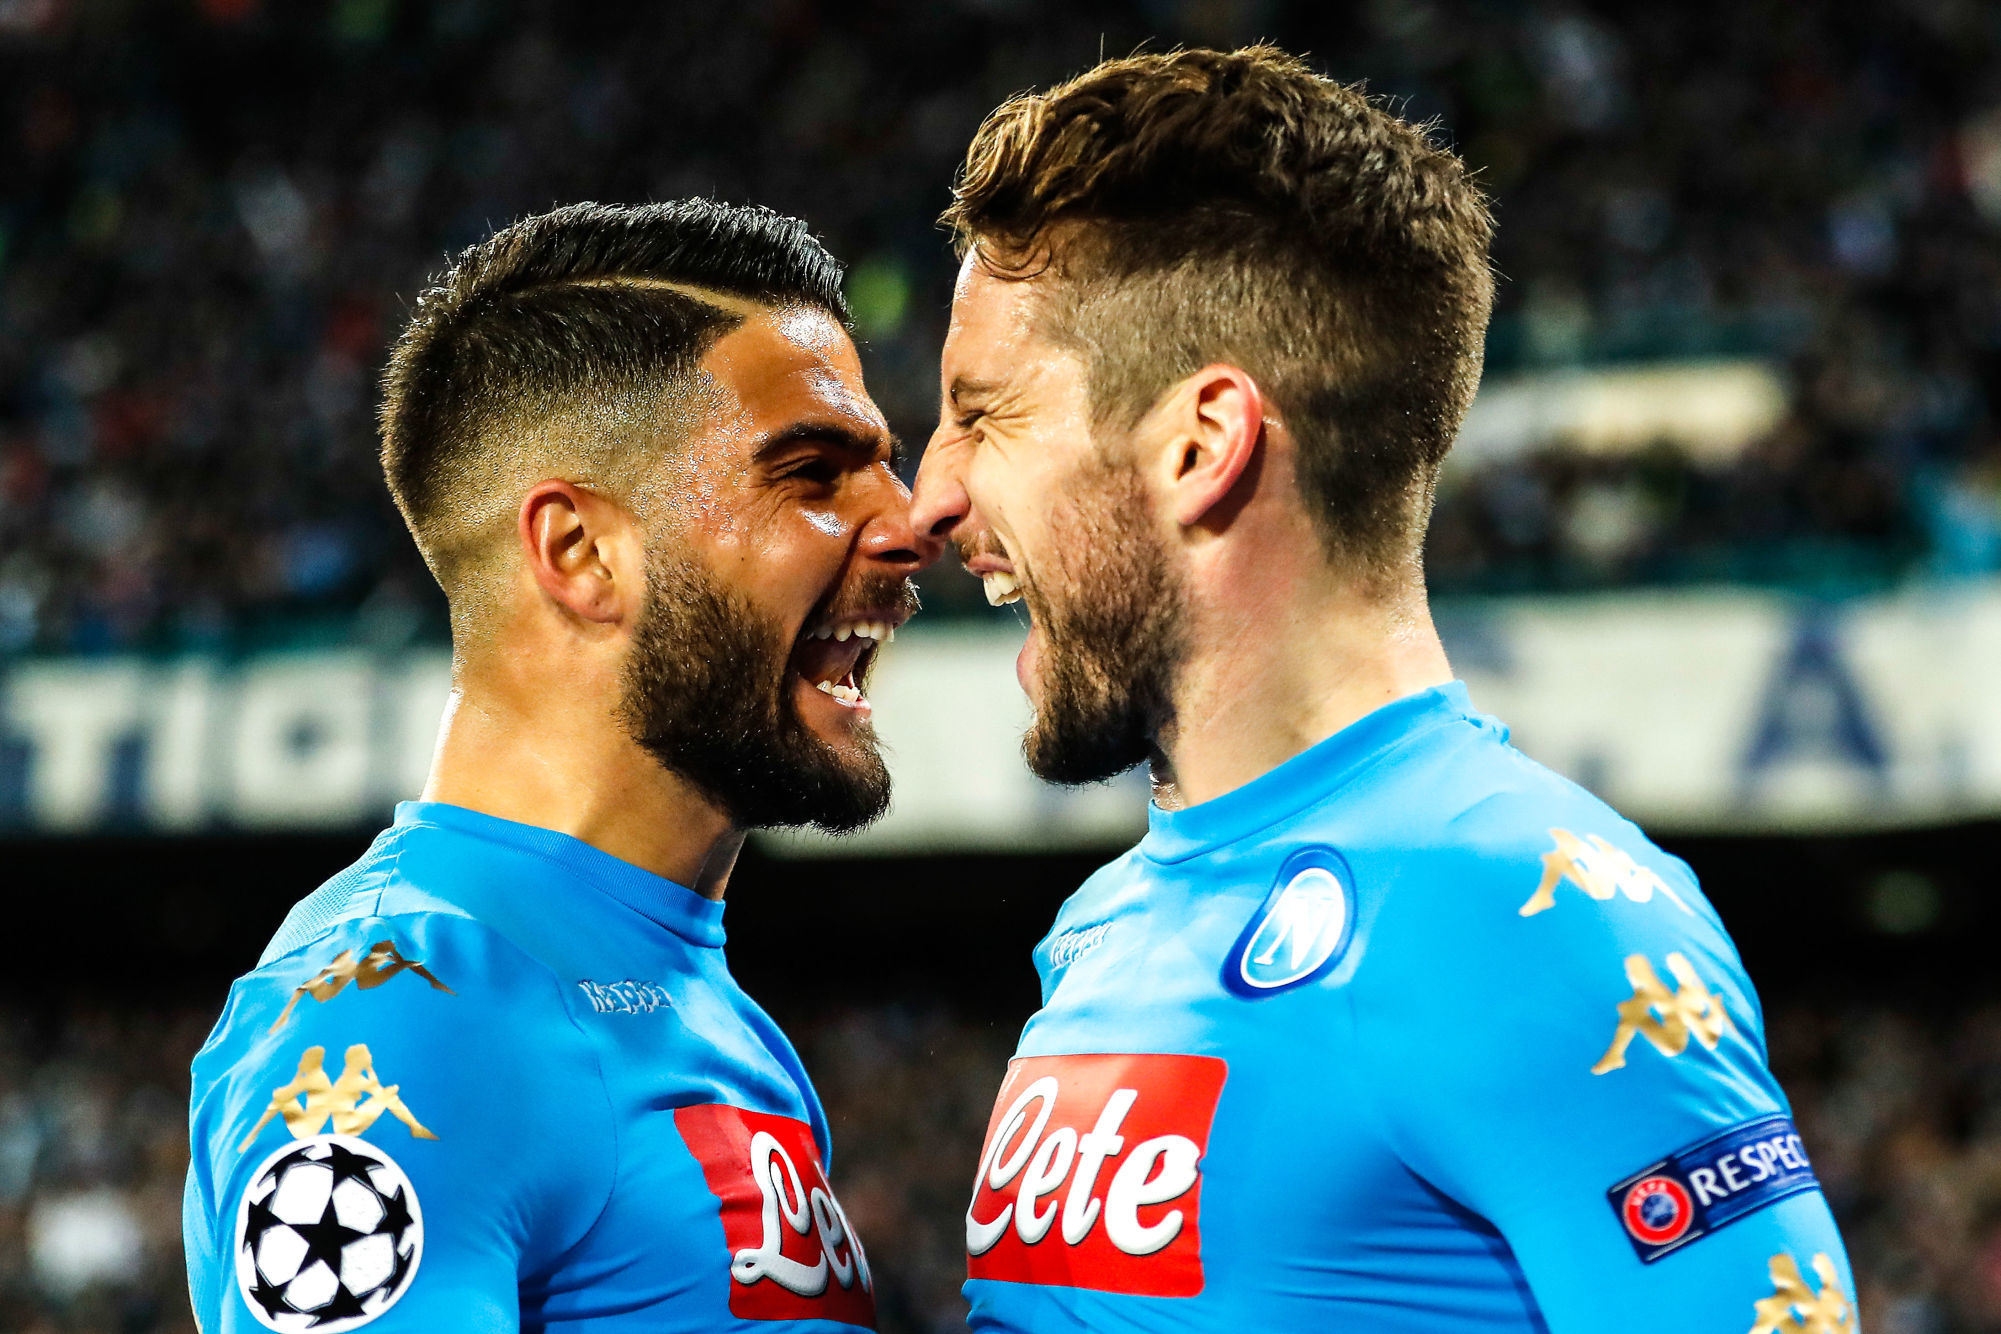 (L-R) Lorenzo Insigne of SSC Napoli, Dries Mertens of SSC Napoliduring the UEFA Champions League round of 16 match between SSC Napoli and Real Madrid on March 07, 2017 at the Stadio San Paolo in Naple